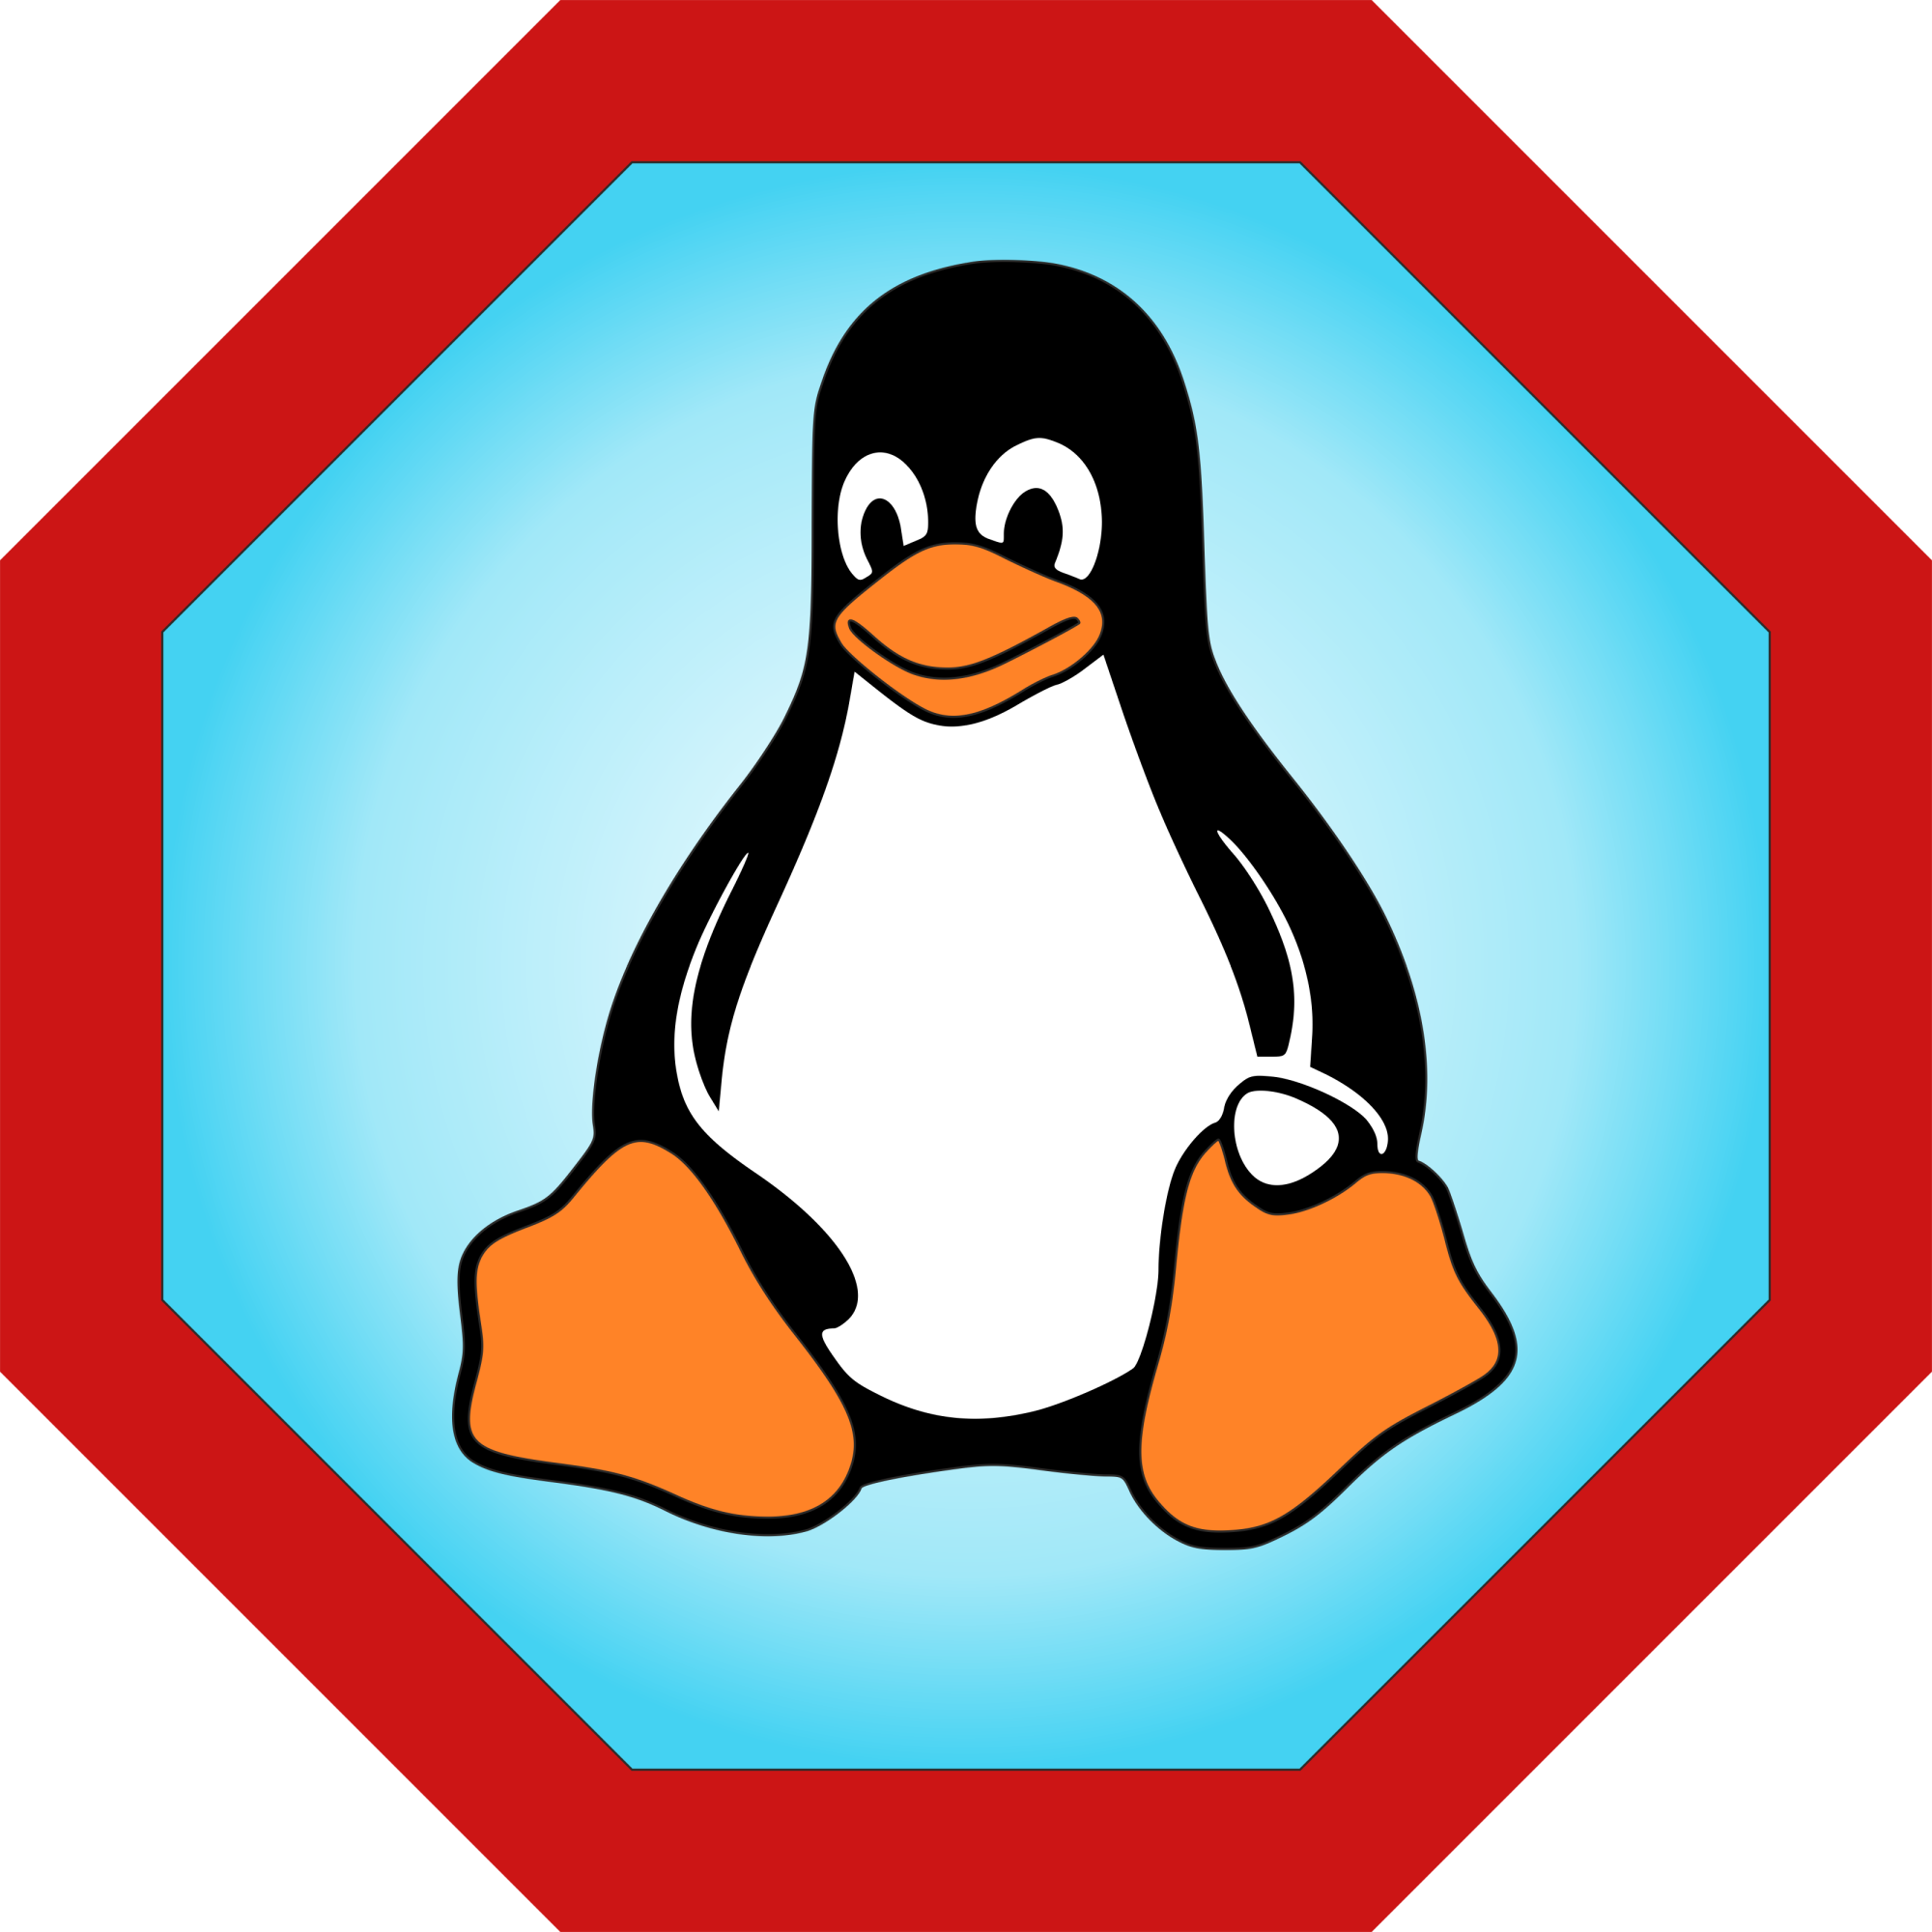 category icon